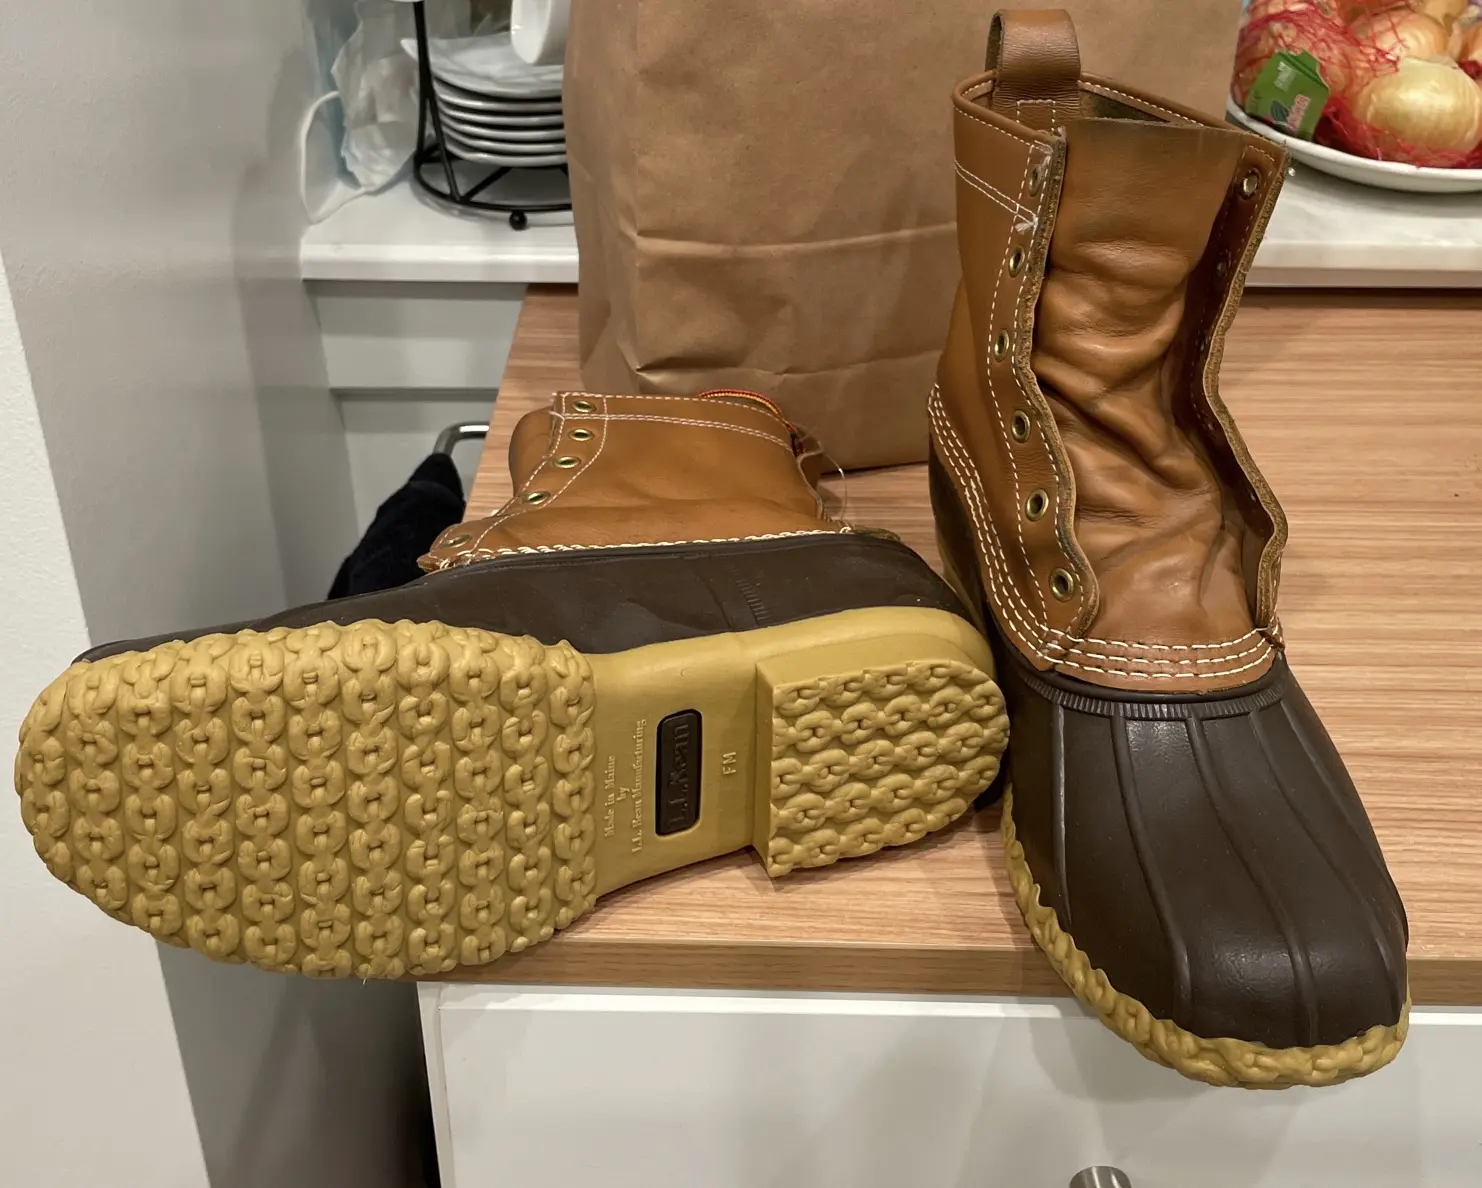 The perennially awesome and water-resistant, L.L. Bean boot